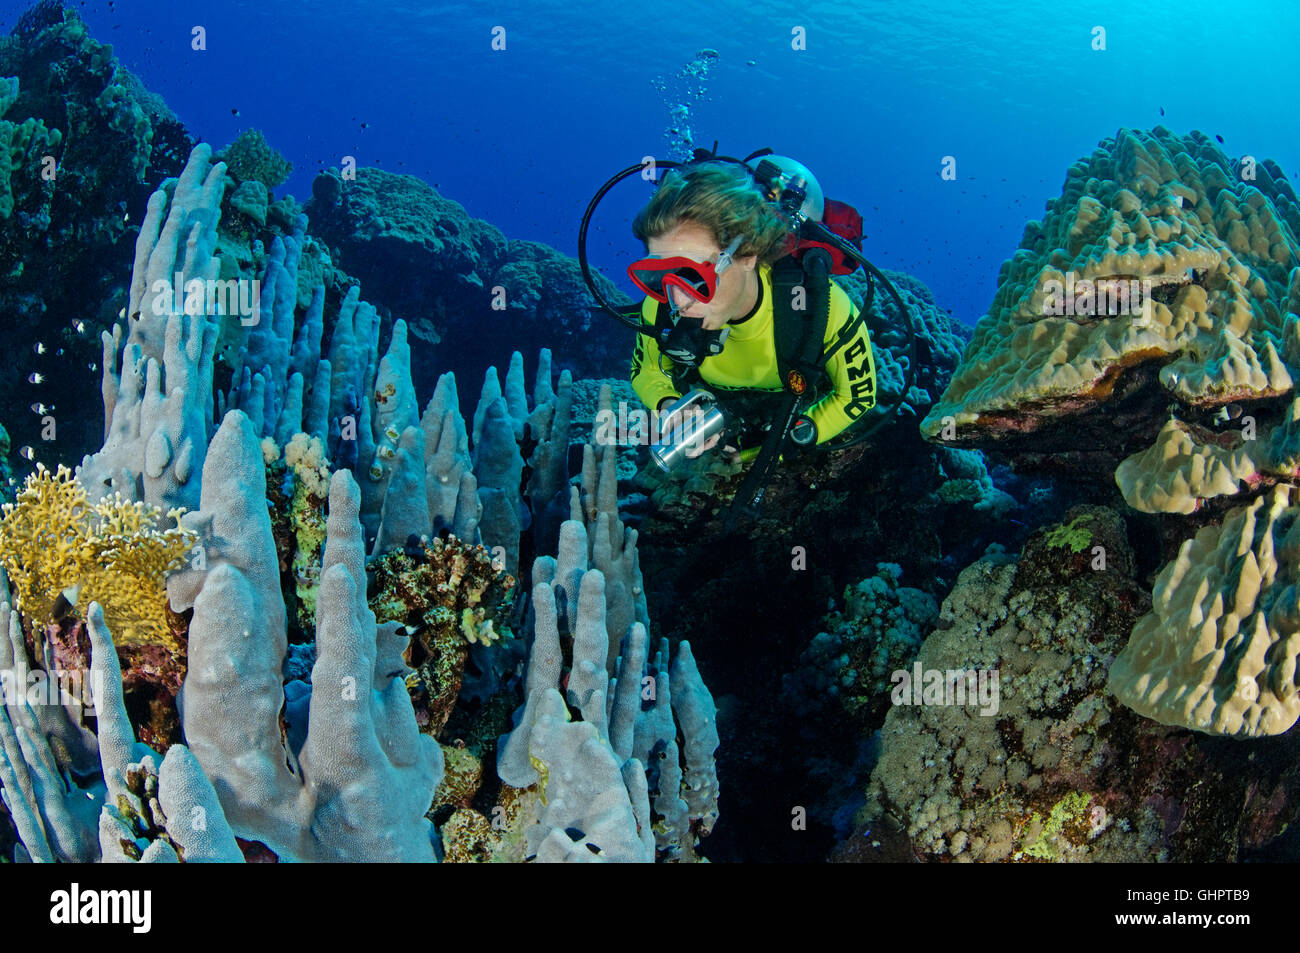 Porites sp., Coralreef with Hardcoral, Stony Coral and scuba diver, Zabargad Reef, El Gubal, Red Sea, Egypt, Africa Stock Photo